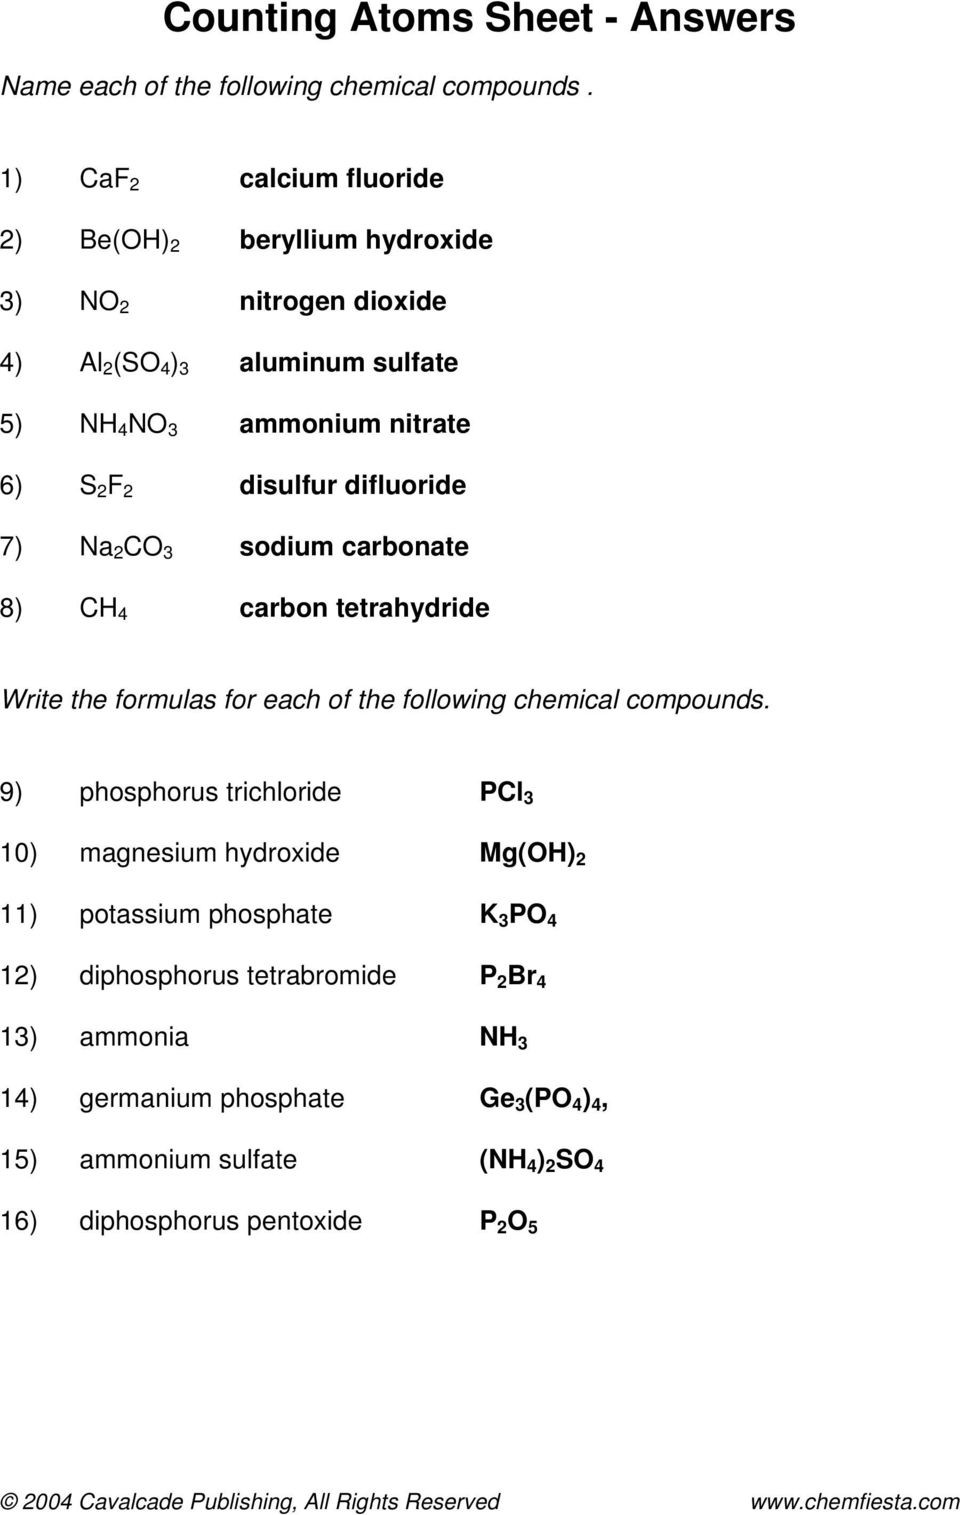 Naming Chemical Compounds Worksheet Answers Worksheet 23 Writing formulas Chemistry Answers